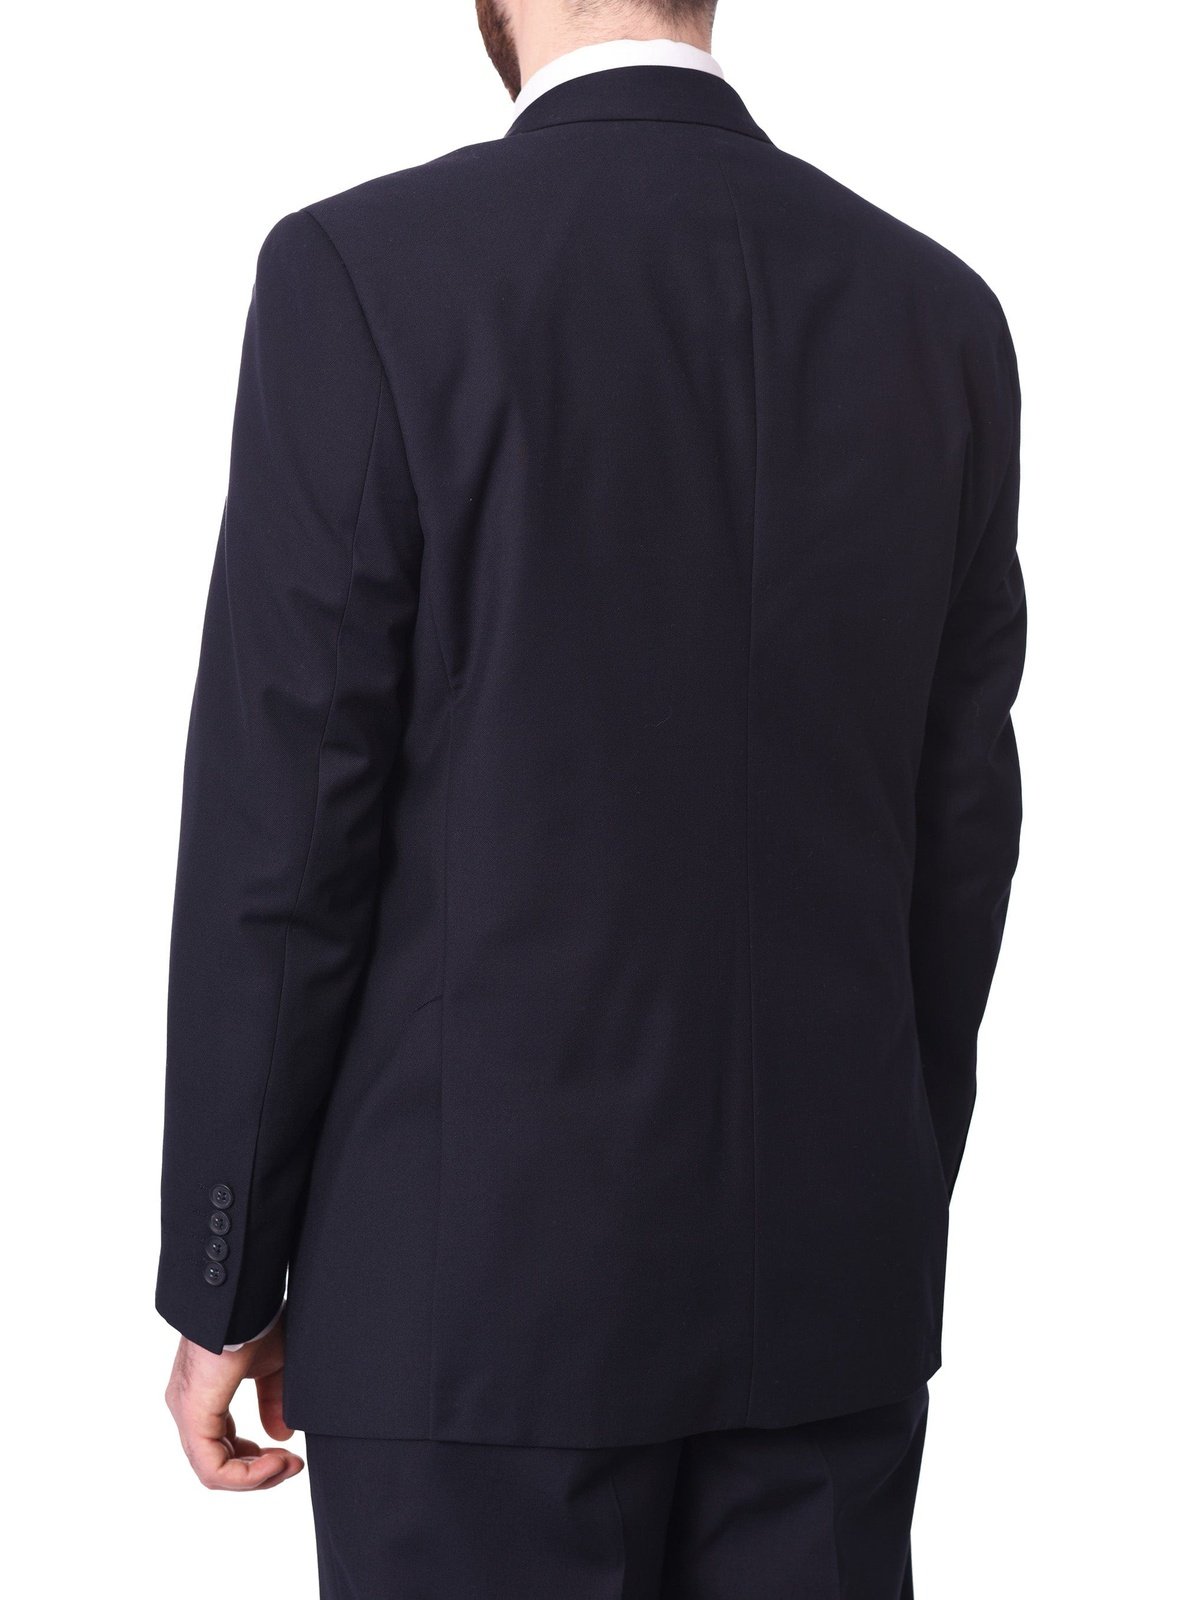 Raphael Bestselling Items Raphael Classic Fit Solid Navy Blue Two Button Wool-touch Suit